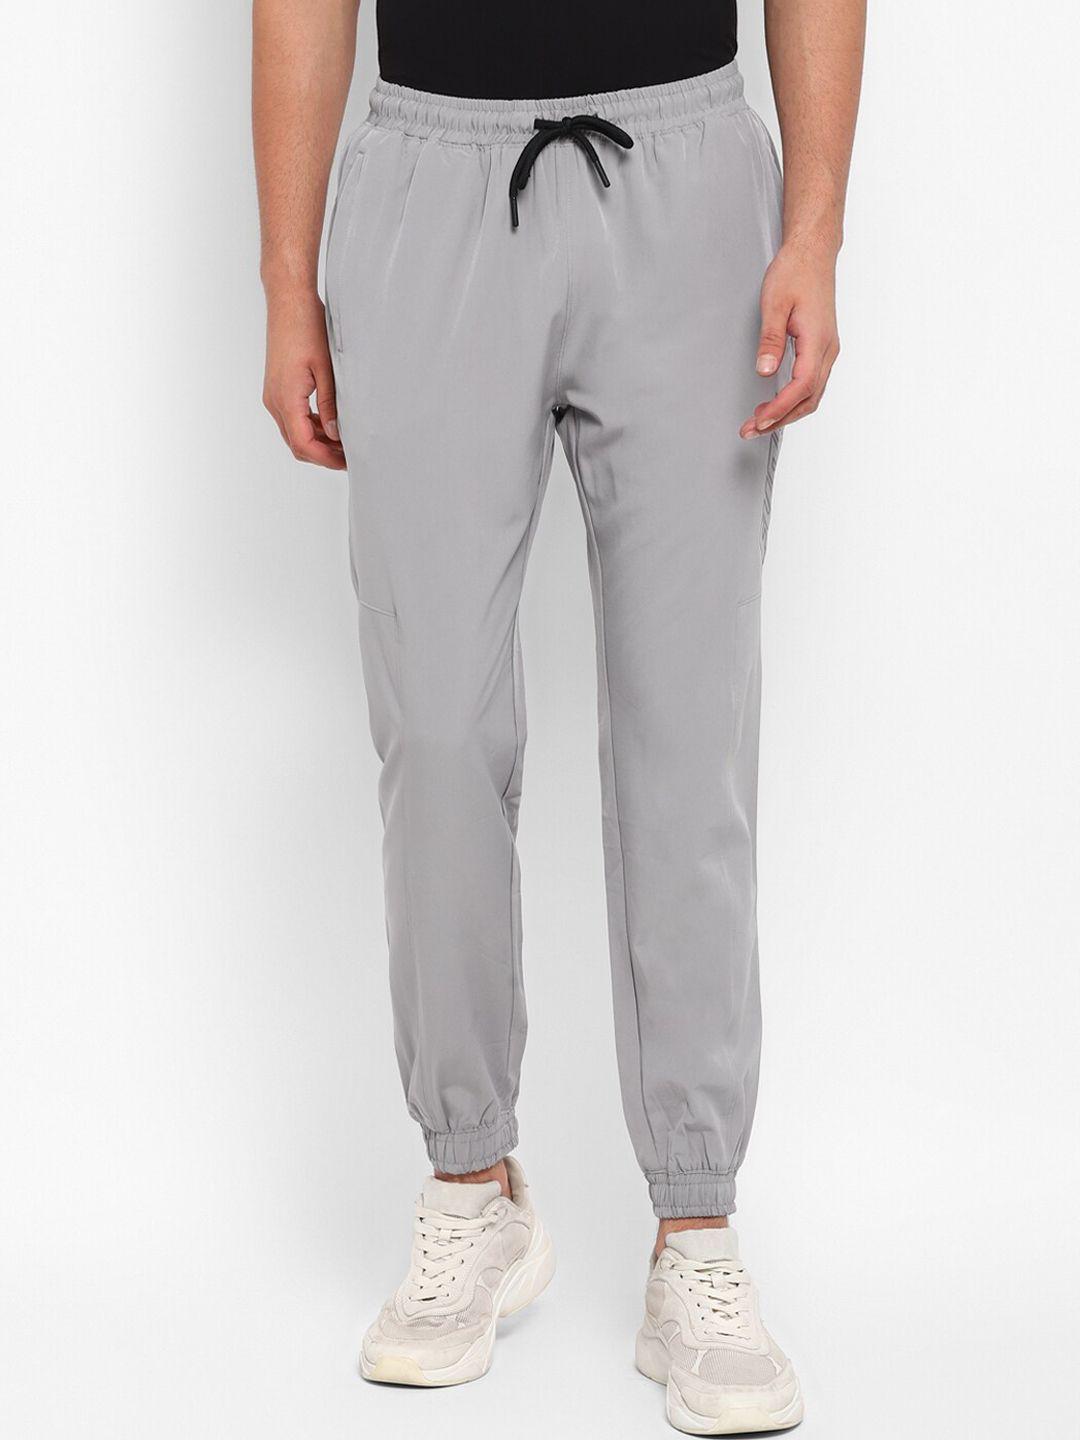 furo-by-red-chief-men-grey-joggers